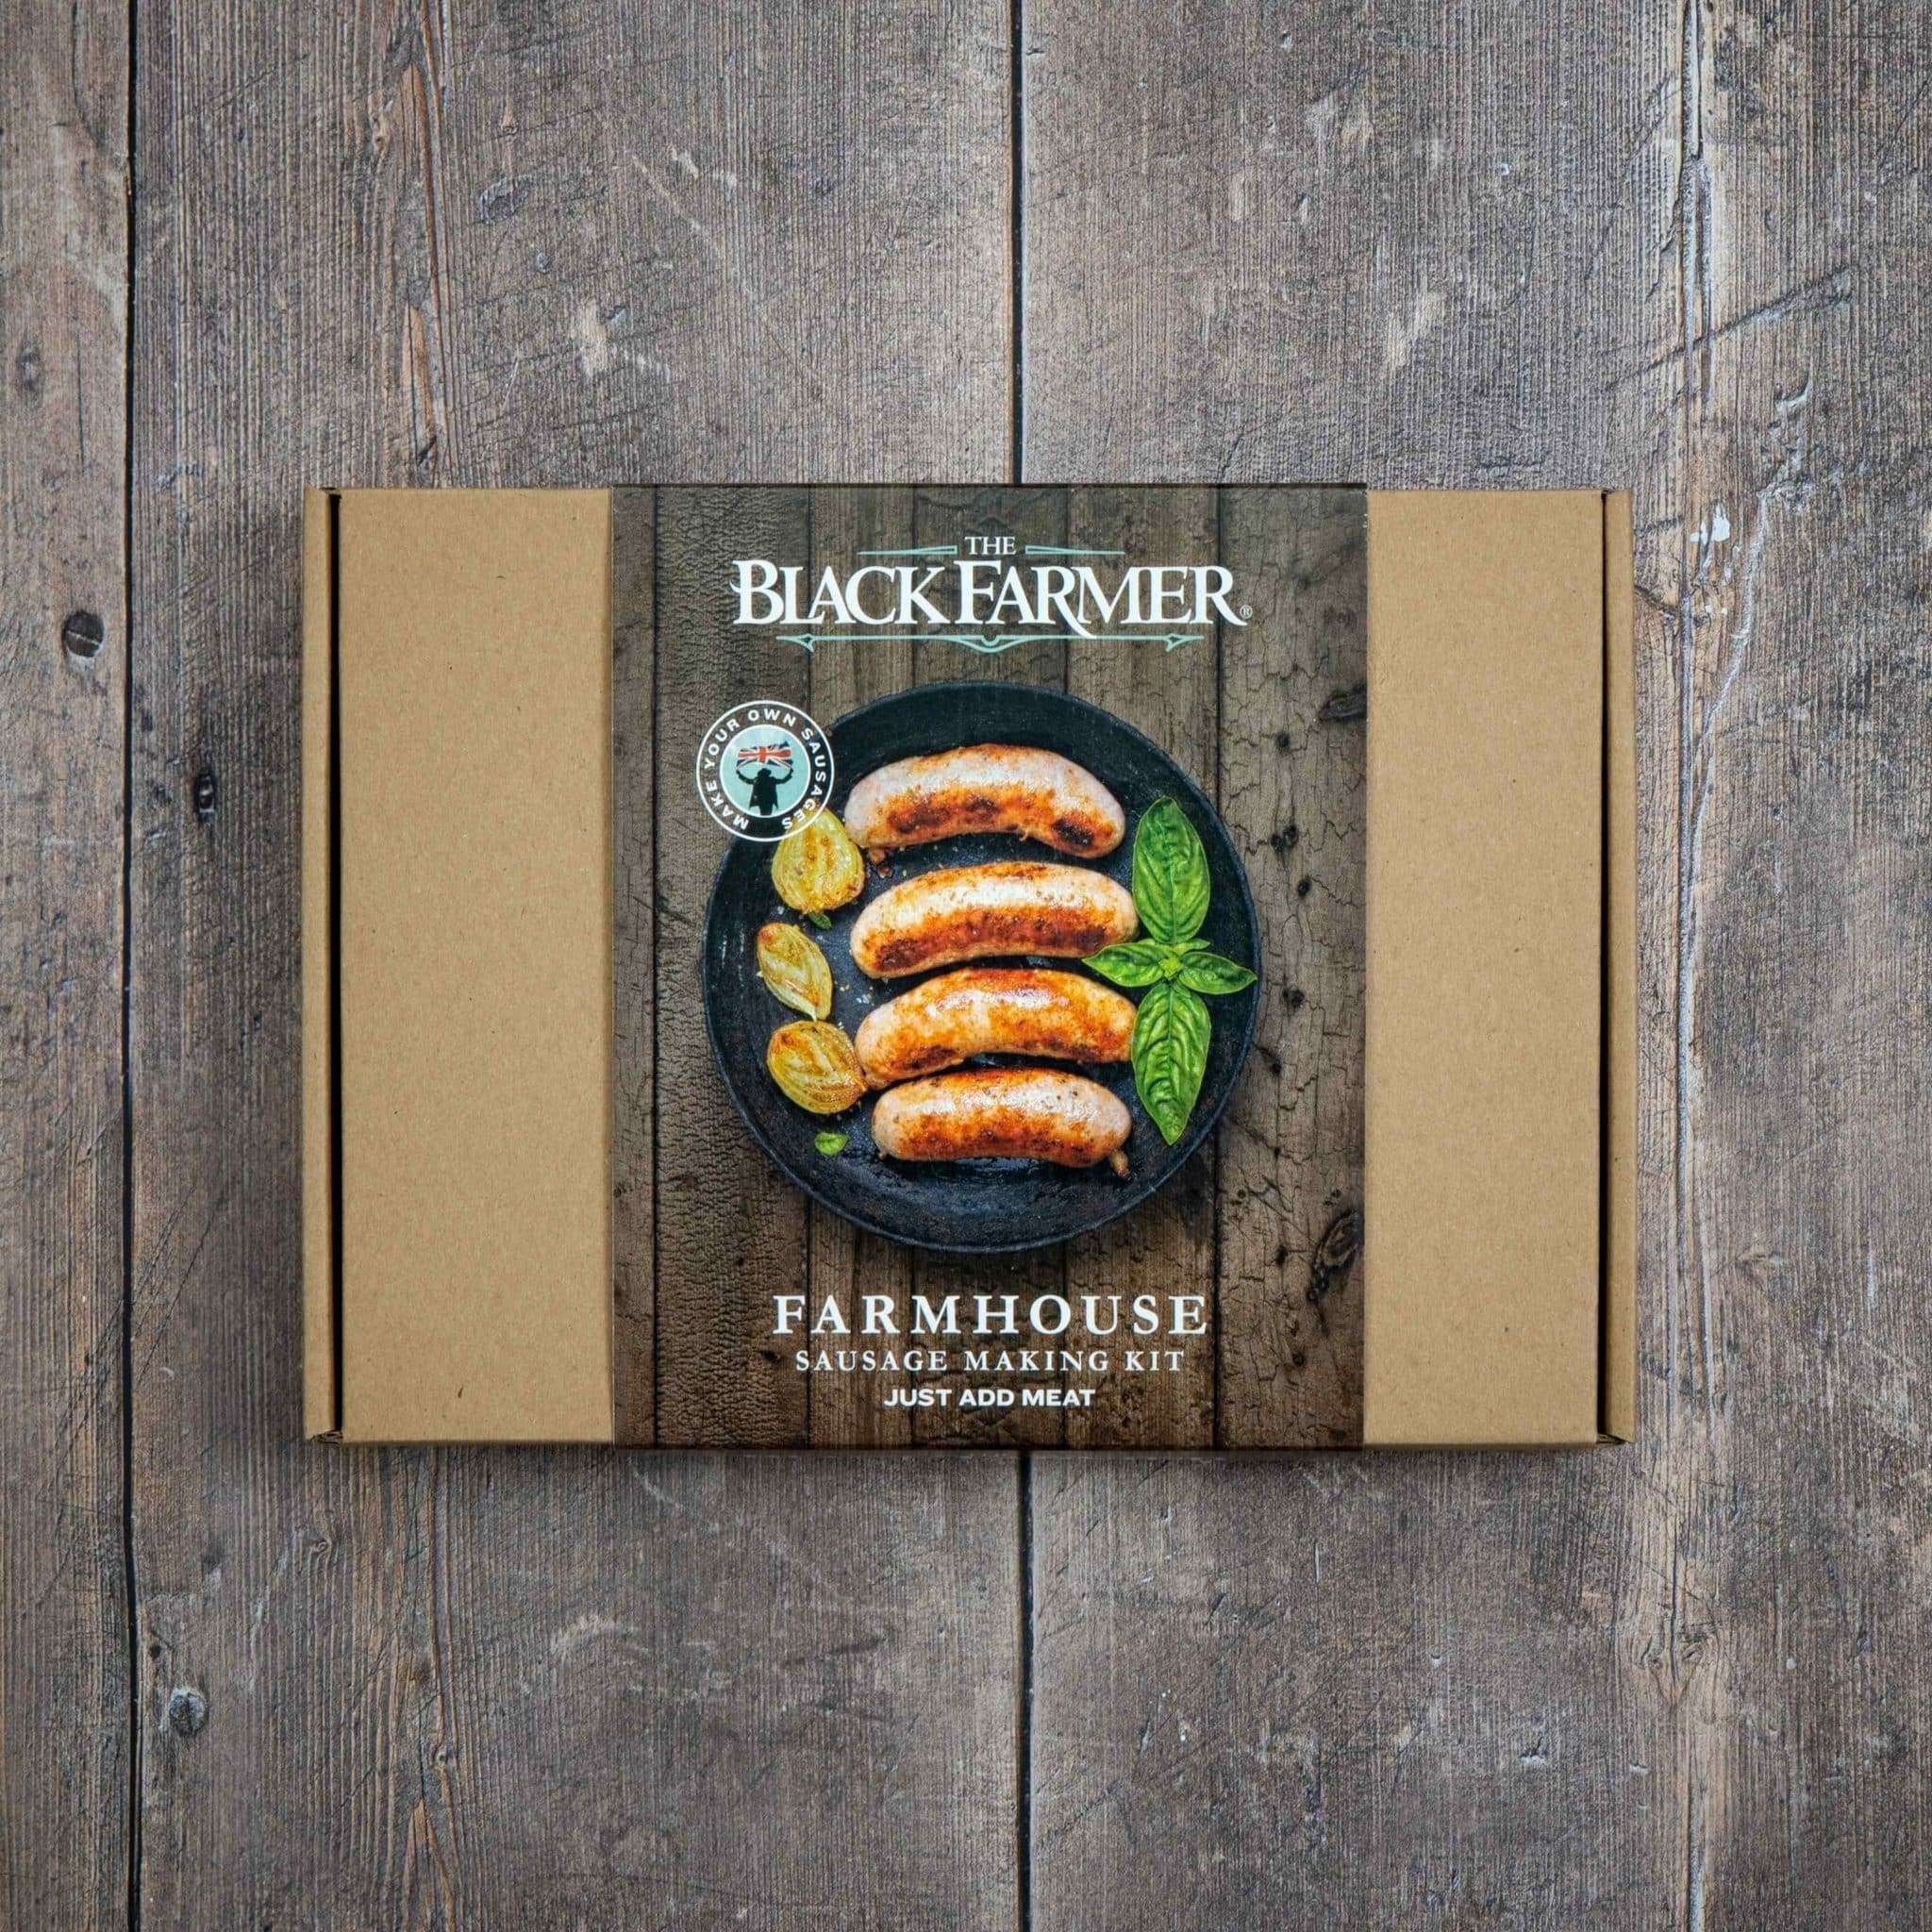 Farmhouse sausage kit on own.psd scaled Make your own sausages! This Farmhouse sausage making kit has everything you need to make your own sausages from scratch, simply add your pork meat. The perfect Christmas gift, or enjoy the fun of making your own sausages at home!